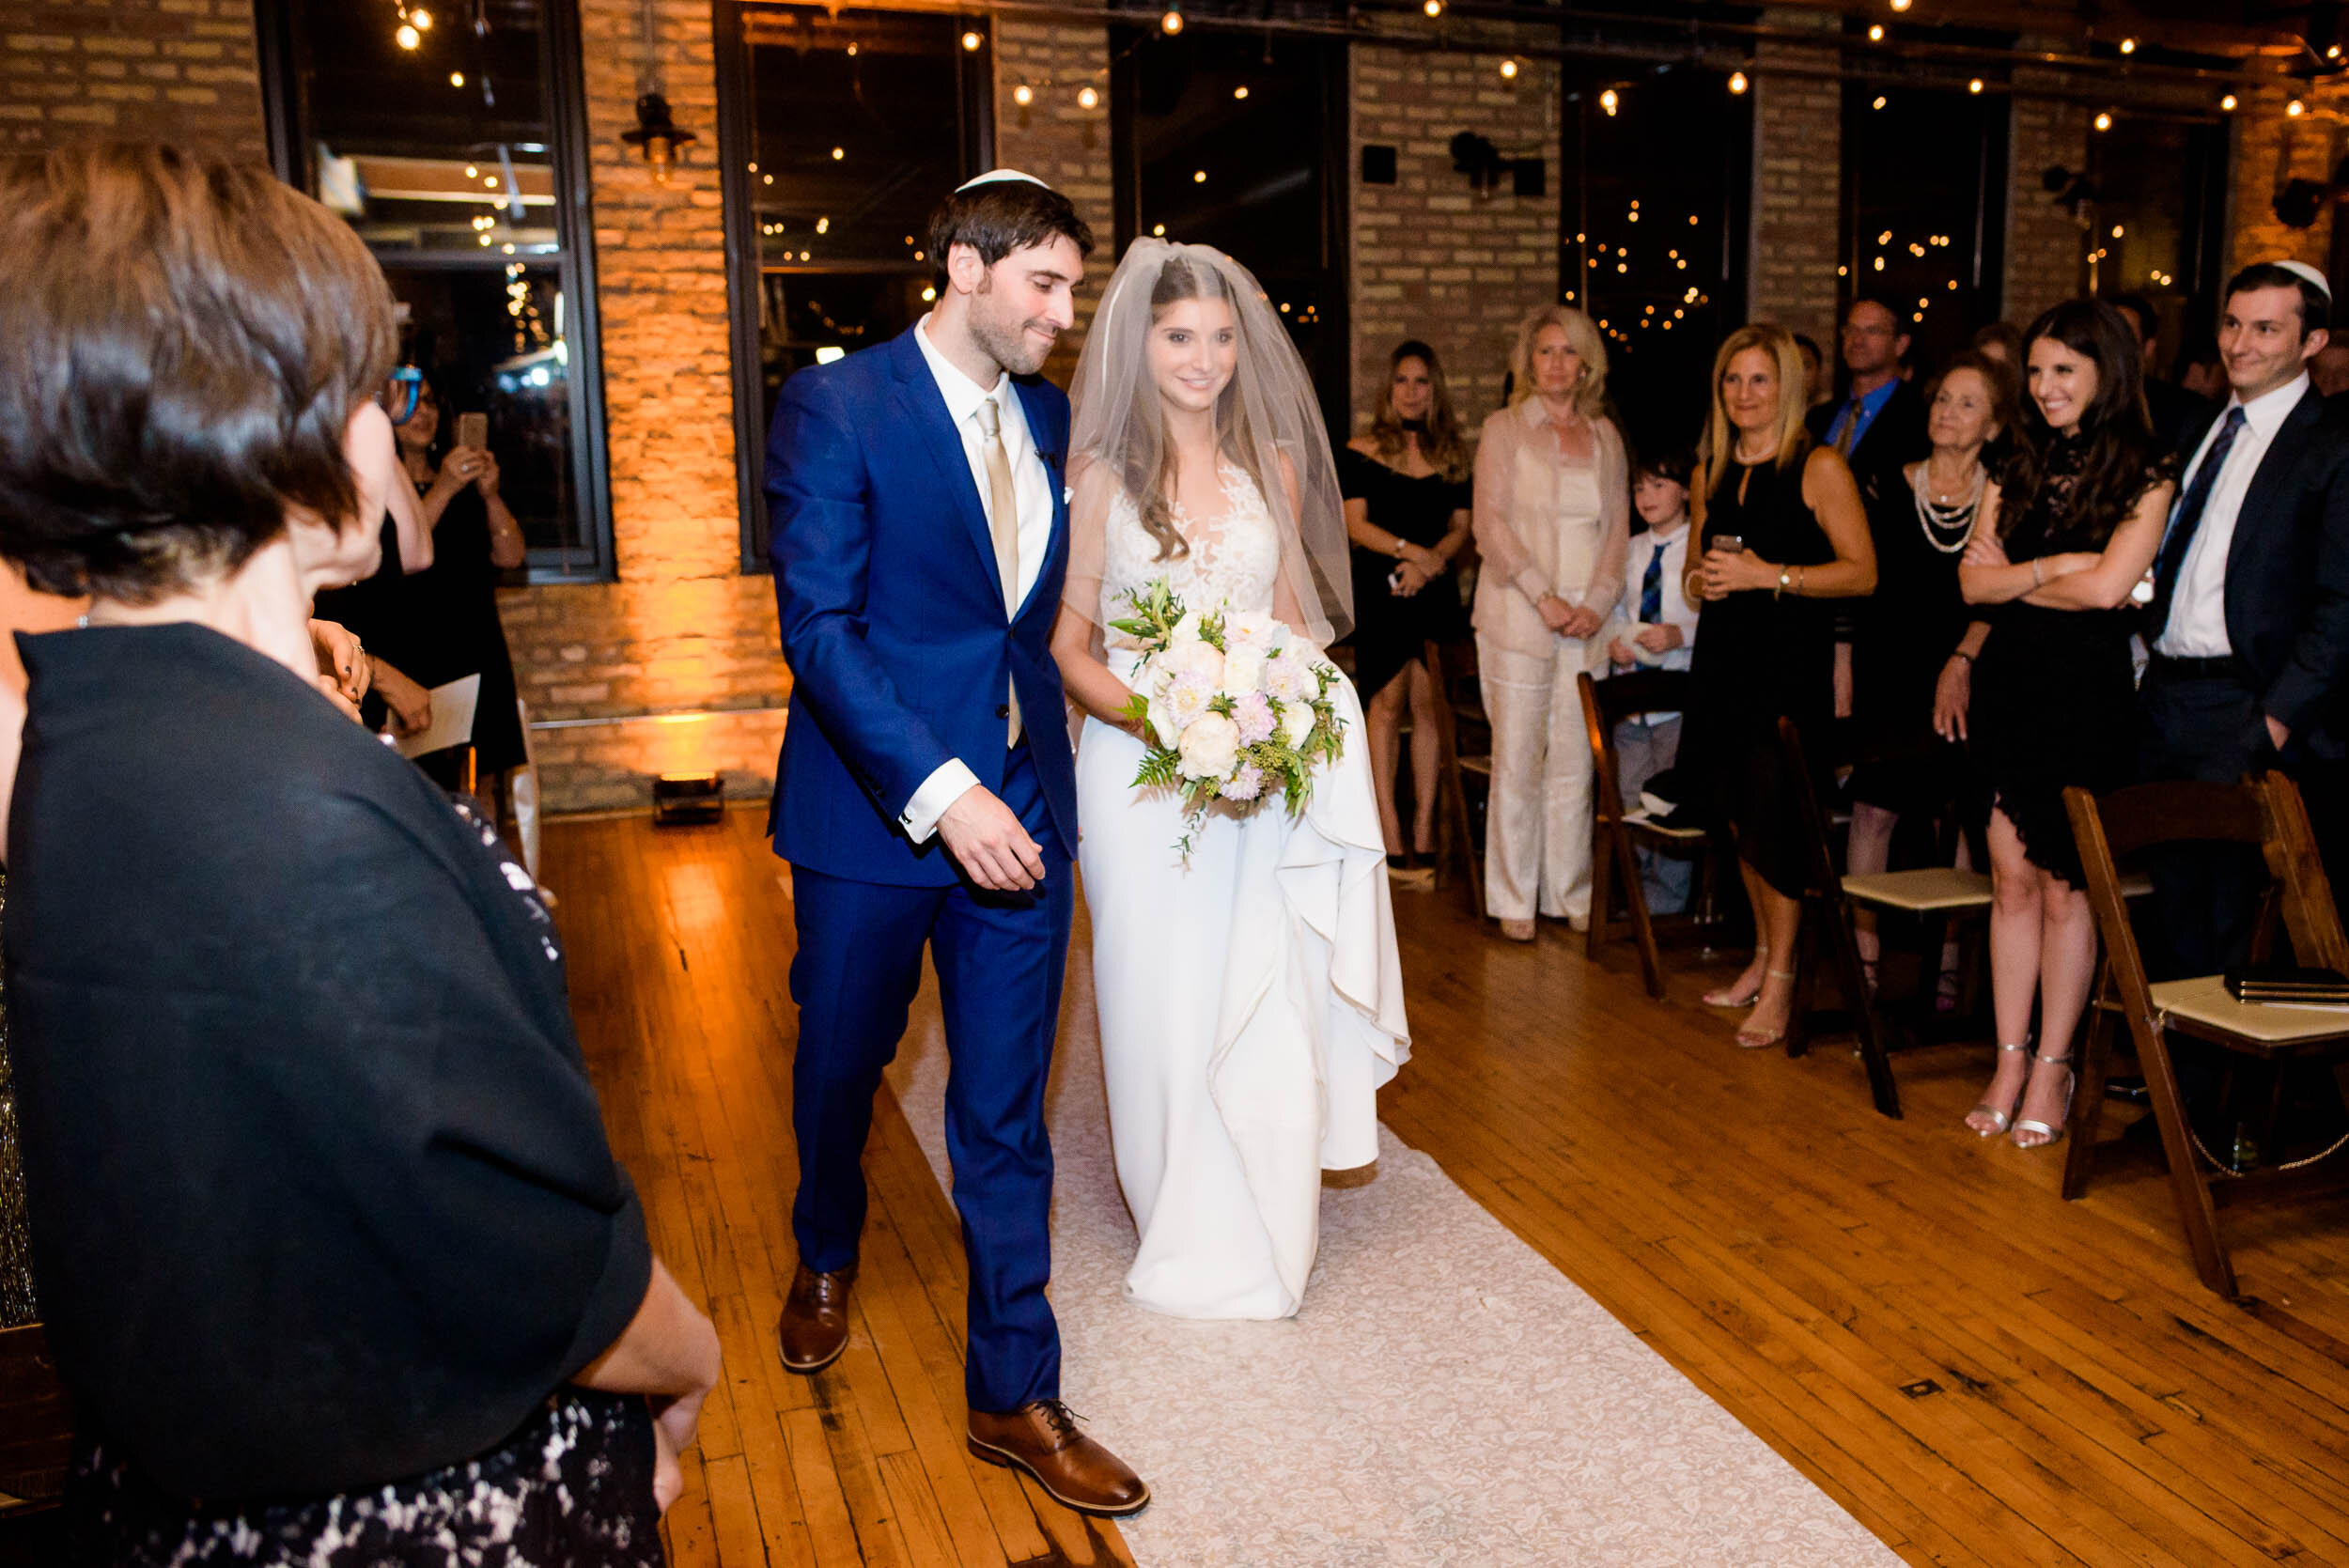 Bride and groom during a Jewish ceremony: Ravenswood Event Center Chicago wedding captured by J. Brown Photography.  